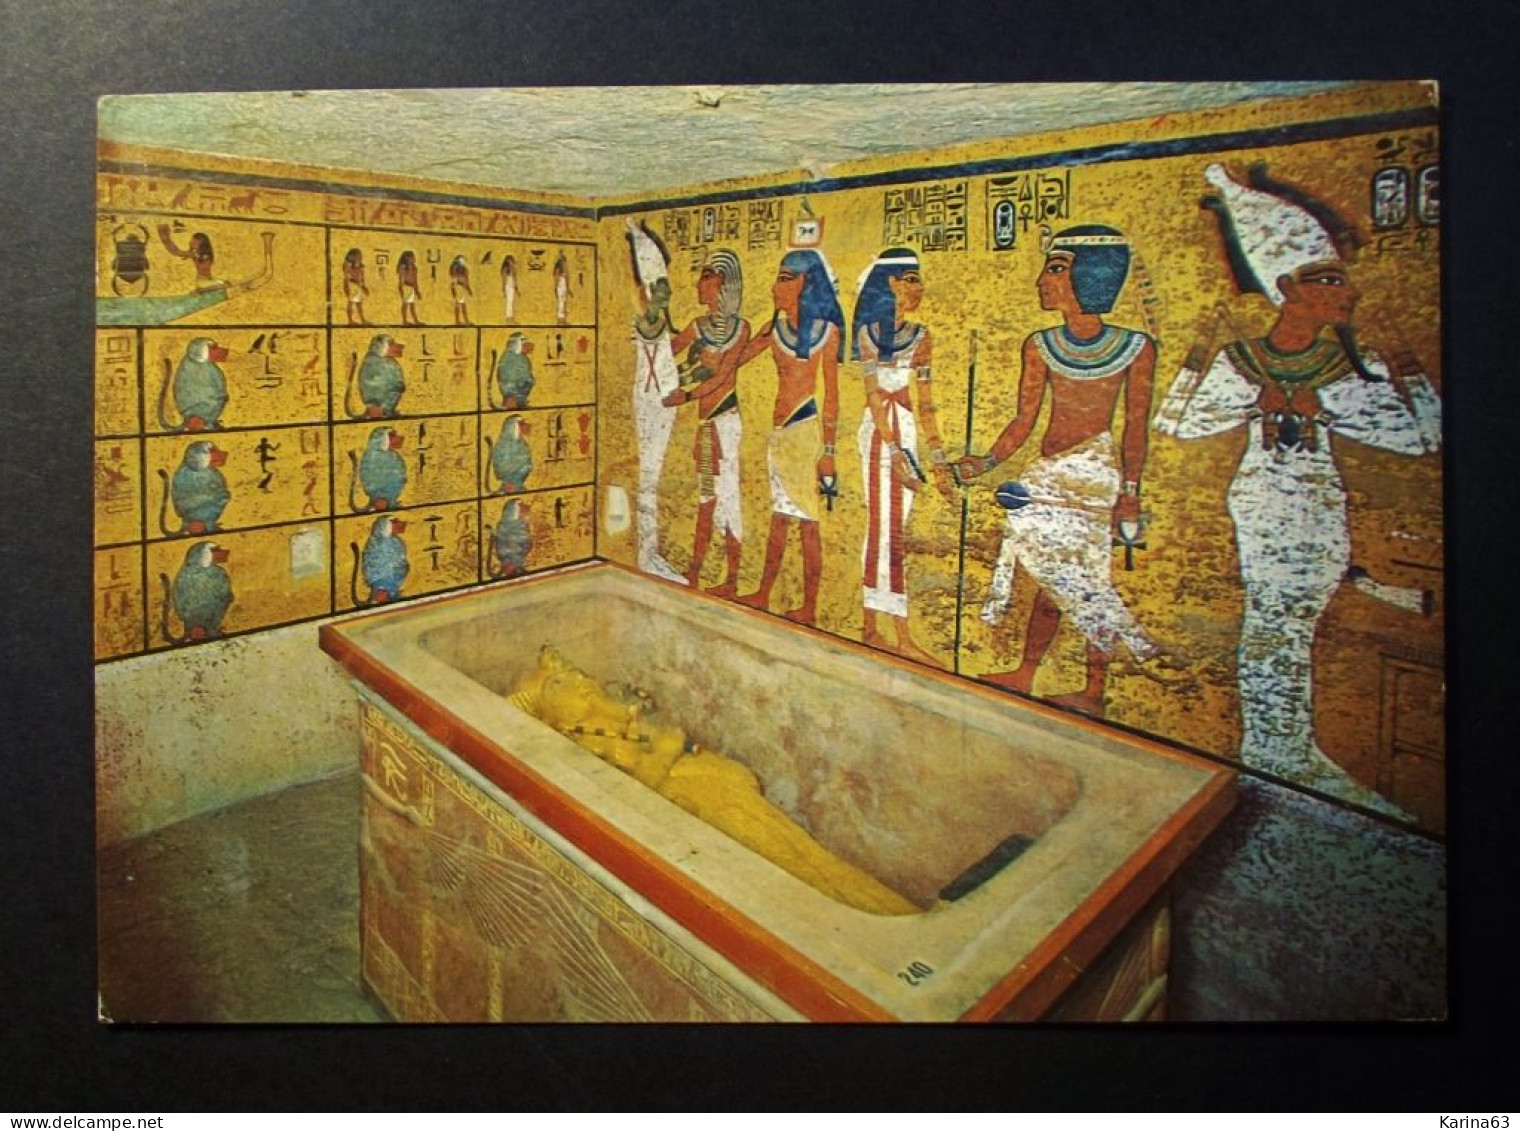 Egypt  - Luxor -  King's Valley - Mummy Of Tut Ankh Amun In The Golden Coffin - Used With Stamp 1978 PYRAMID SAKHARA - Luxor